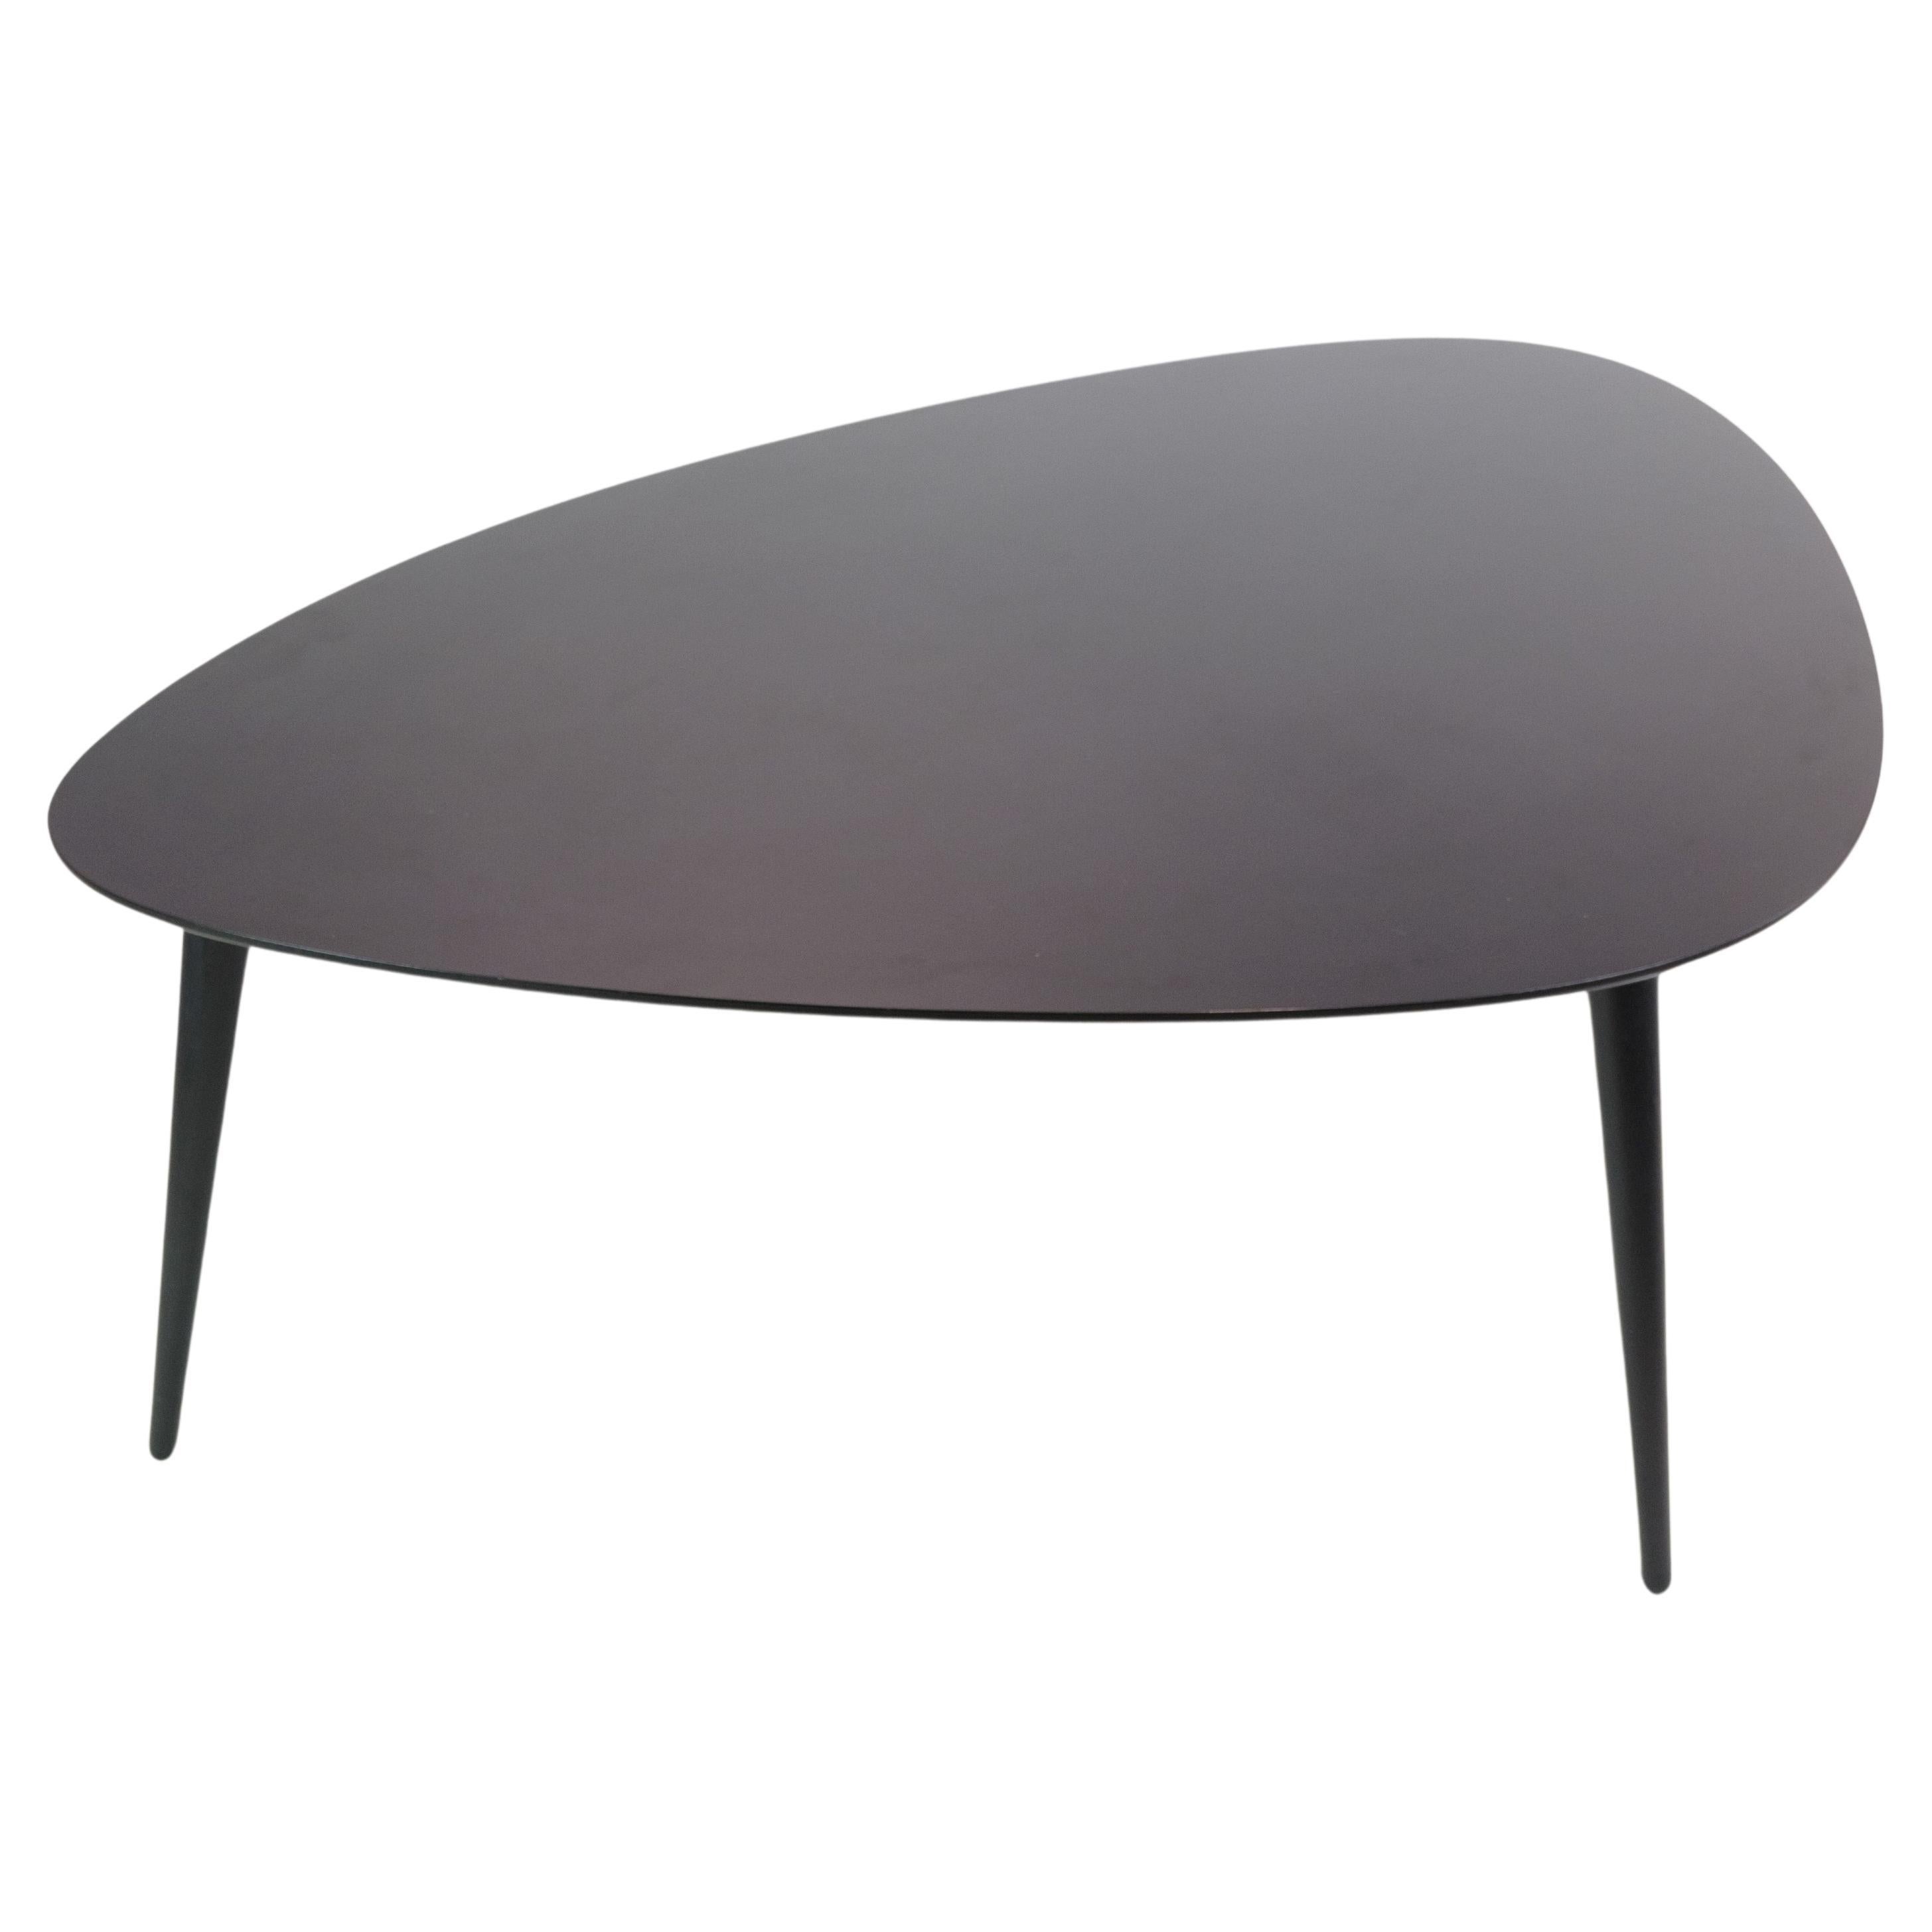 Coffee table In Black Laminate With Oak legs, Made By Fredericia Furniture